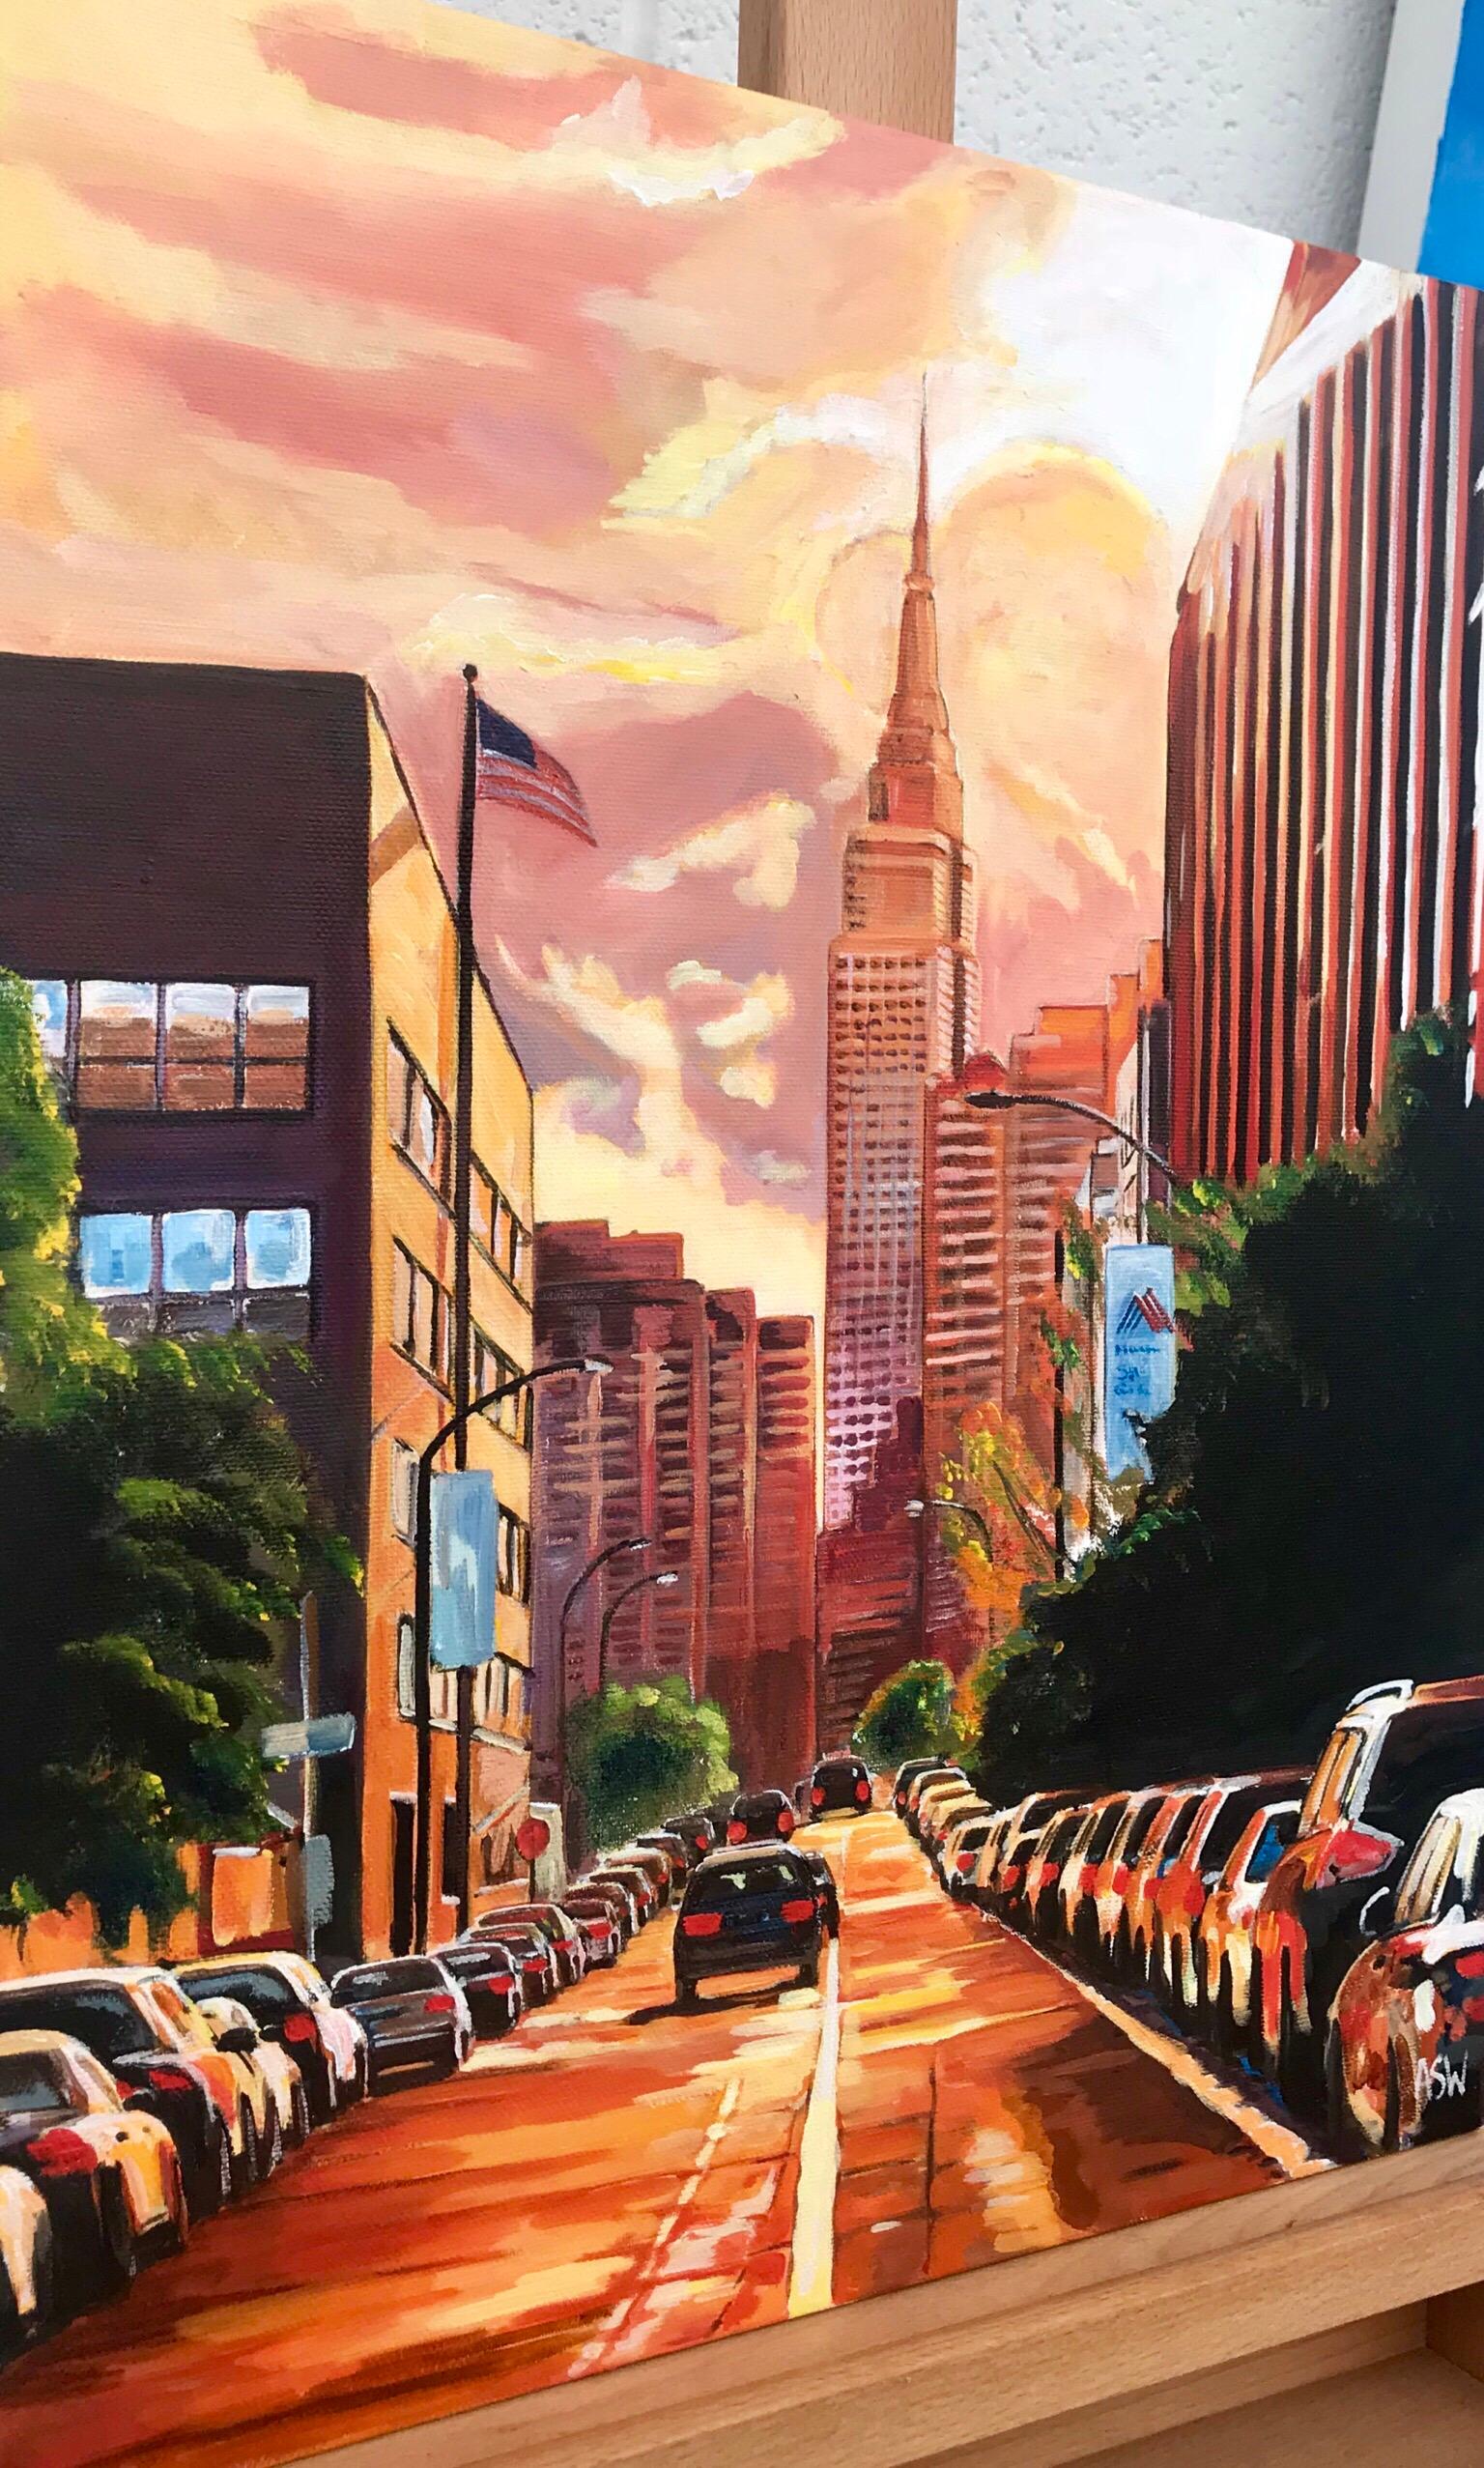 This unique original painting captures the Empire State Building against the backdrop of a beautiful sunset from street level. The artist, Angela Wakefield, is a leading English Urban Cityscape Artist.

Angela Wakefield has twice been on the front